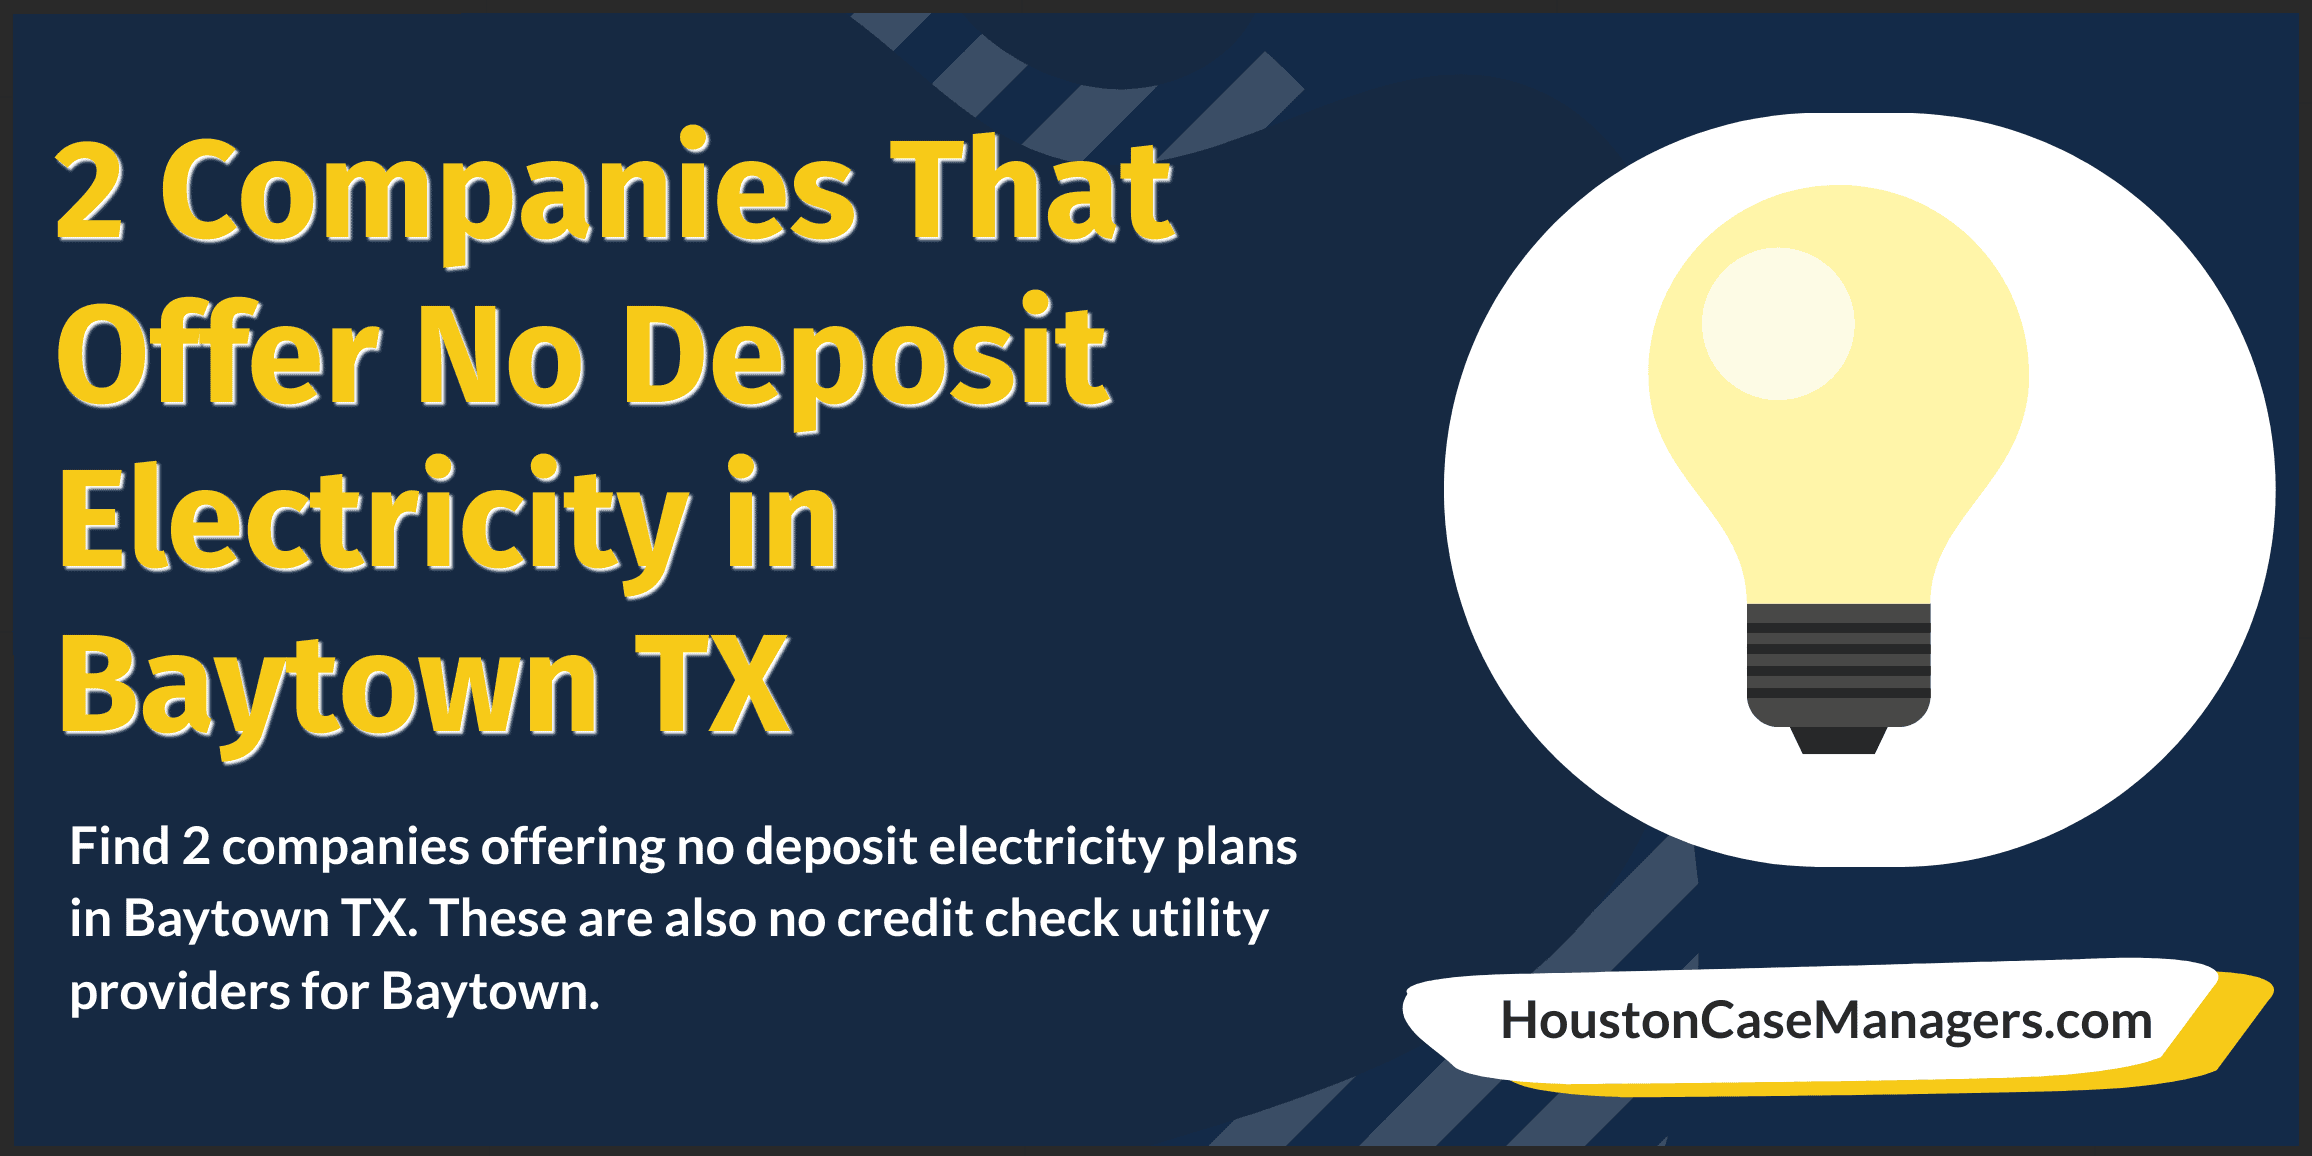 2 Companies Offering No Deposit Electricity in Baytown TX 2020